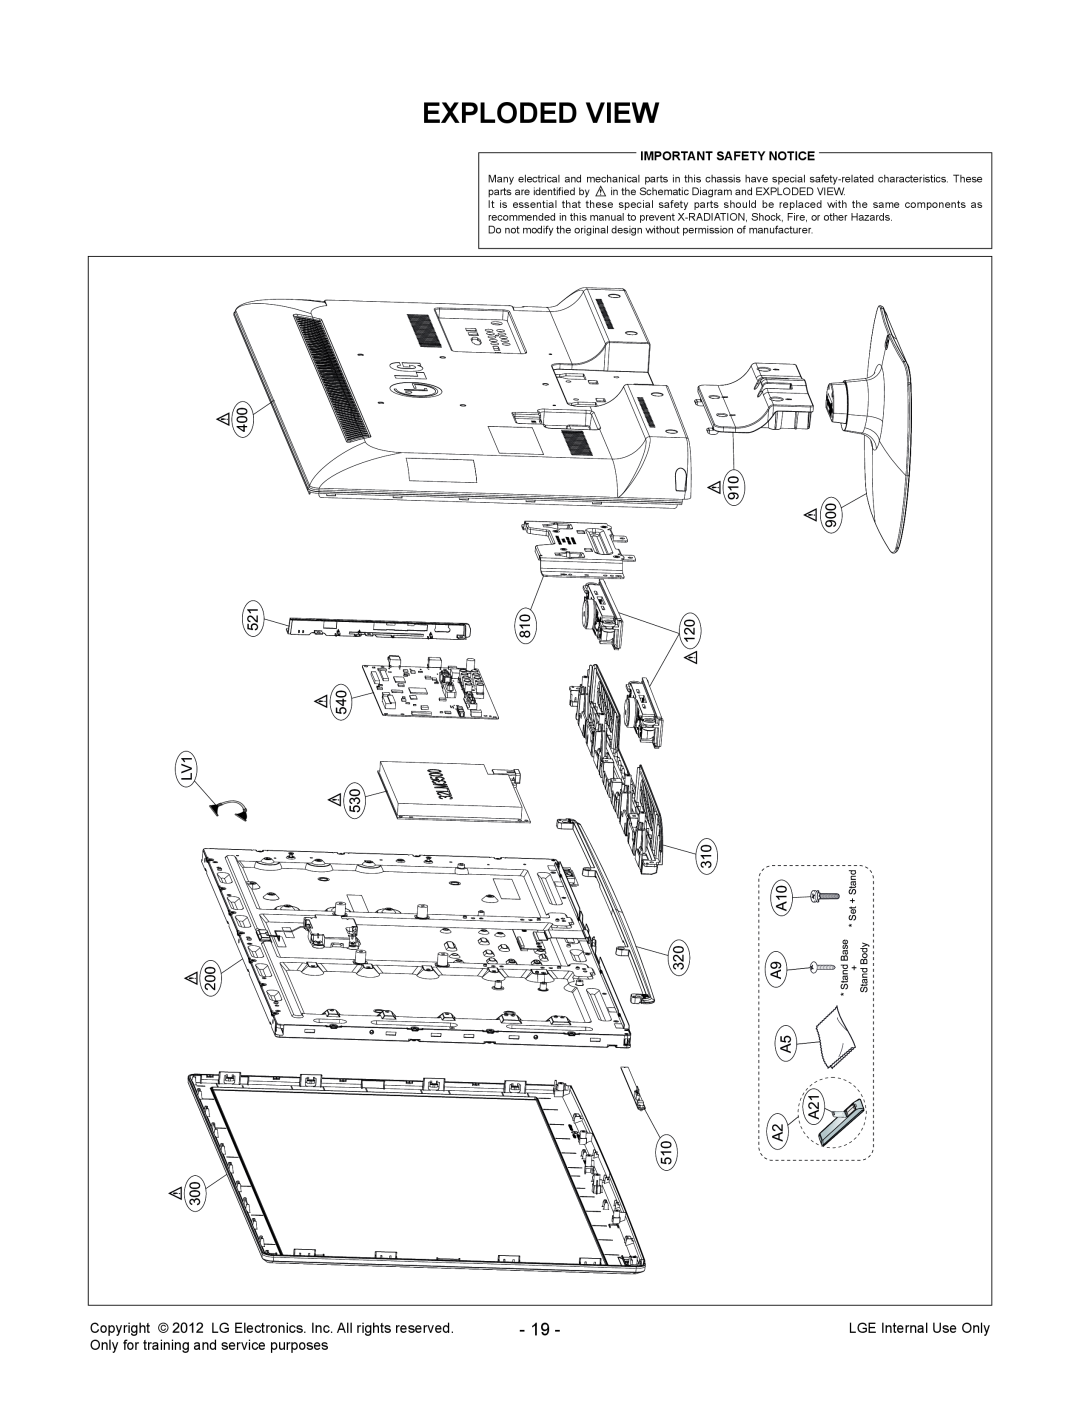 LG Electronics 32LS359S-ZC, 32LS359T-ZC, 32LS3500-ZA, 32LS3590, 32LS350S, 32LS350T Exploded View, Important Safety Notice 